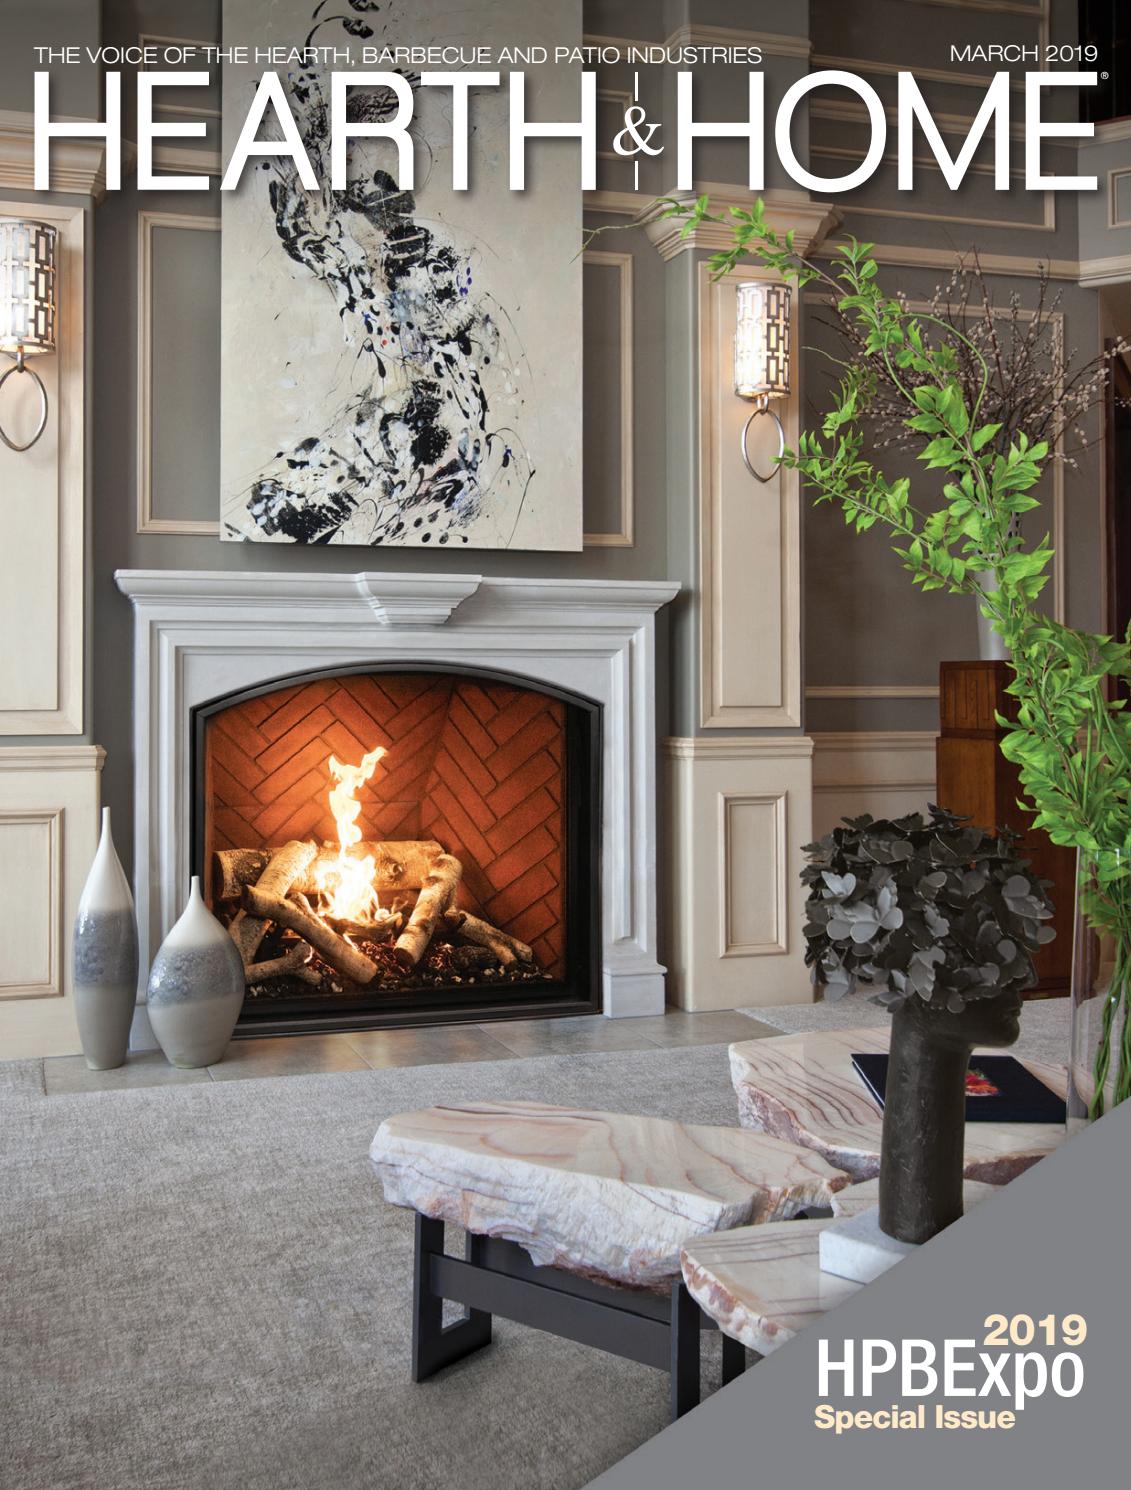 Small Gas Fireplace Stove Unique Hearth & Home Magazine – 2019 March issue by Hearth & Home